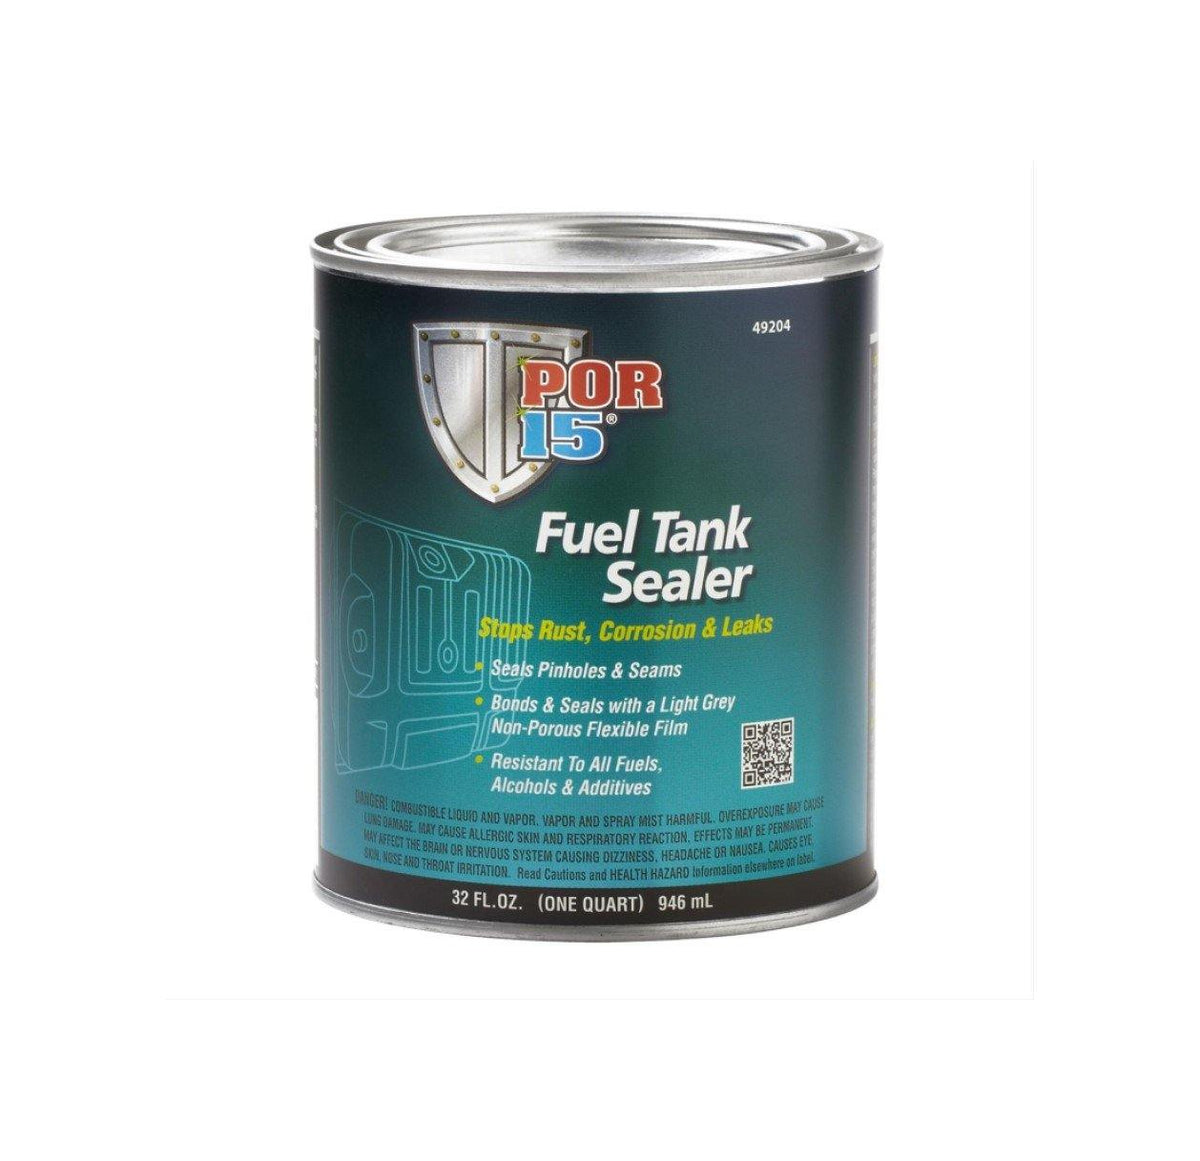  POR-15 Fuel Tank Sealer, Stops Rust, Corrosion and Leaks,  Resistant To All Fuels, Alcohols and Additives, 32 Fluid Ounces, 1-quart :  Automotive